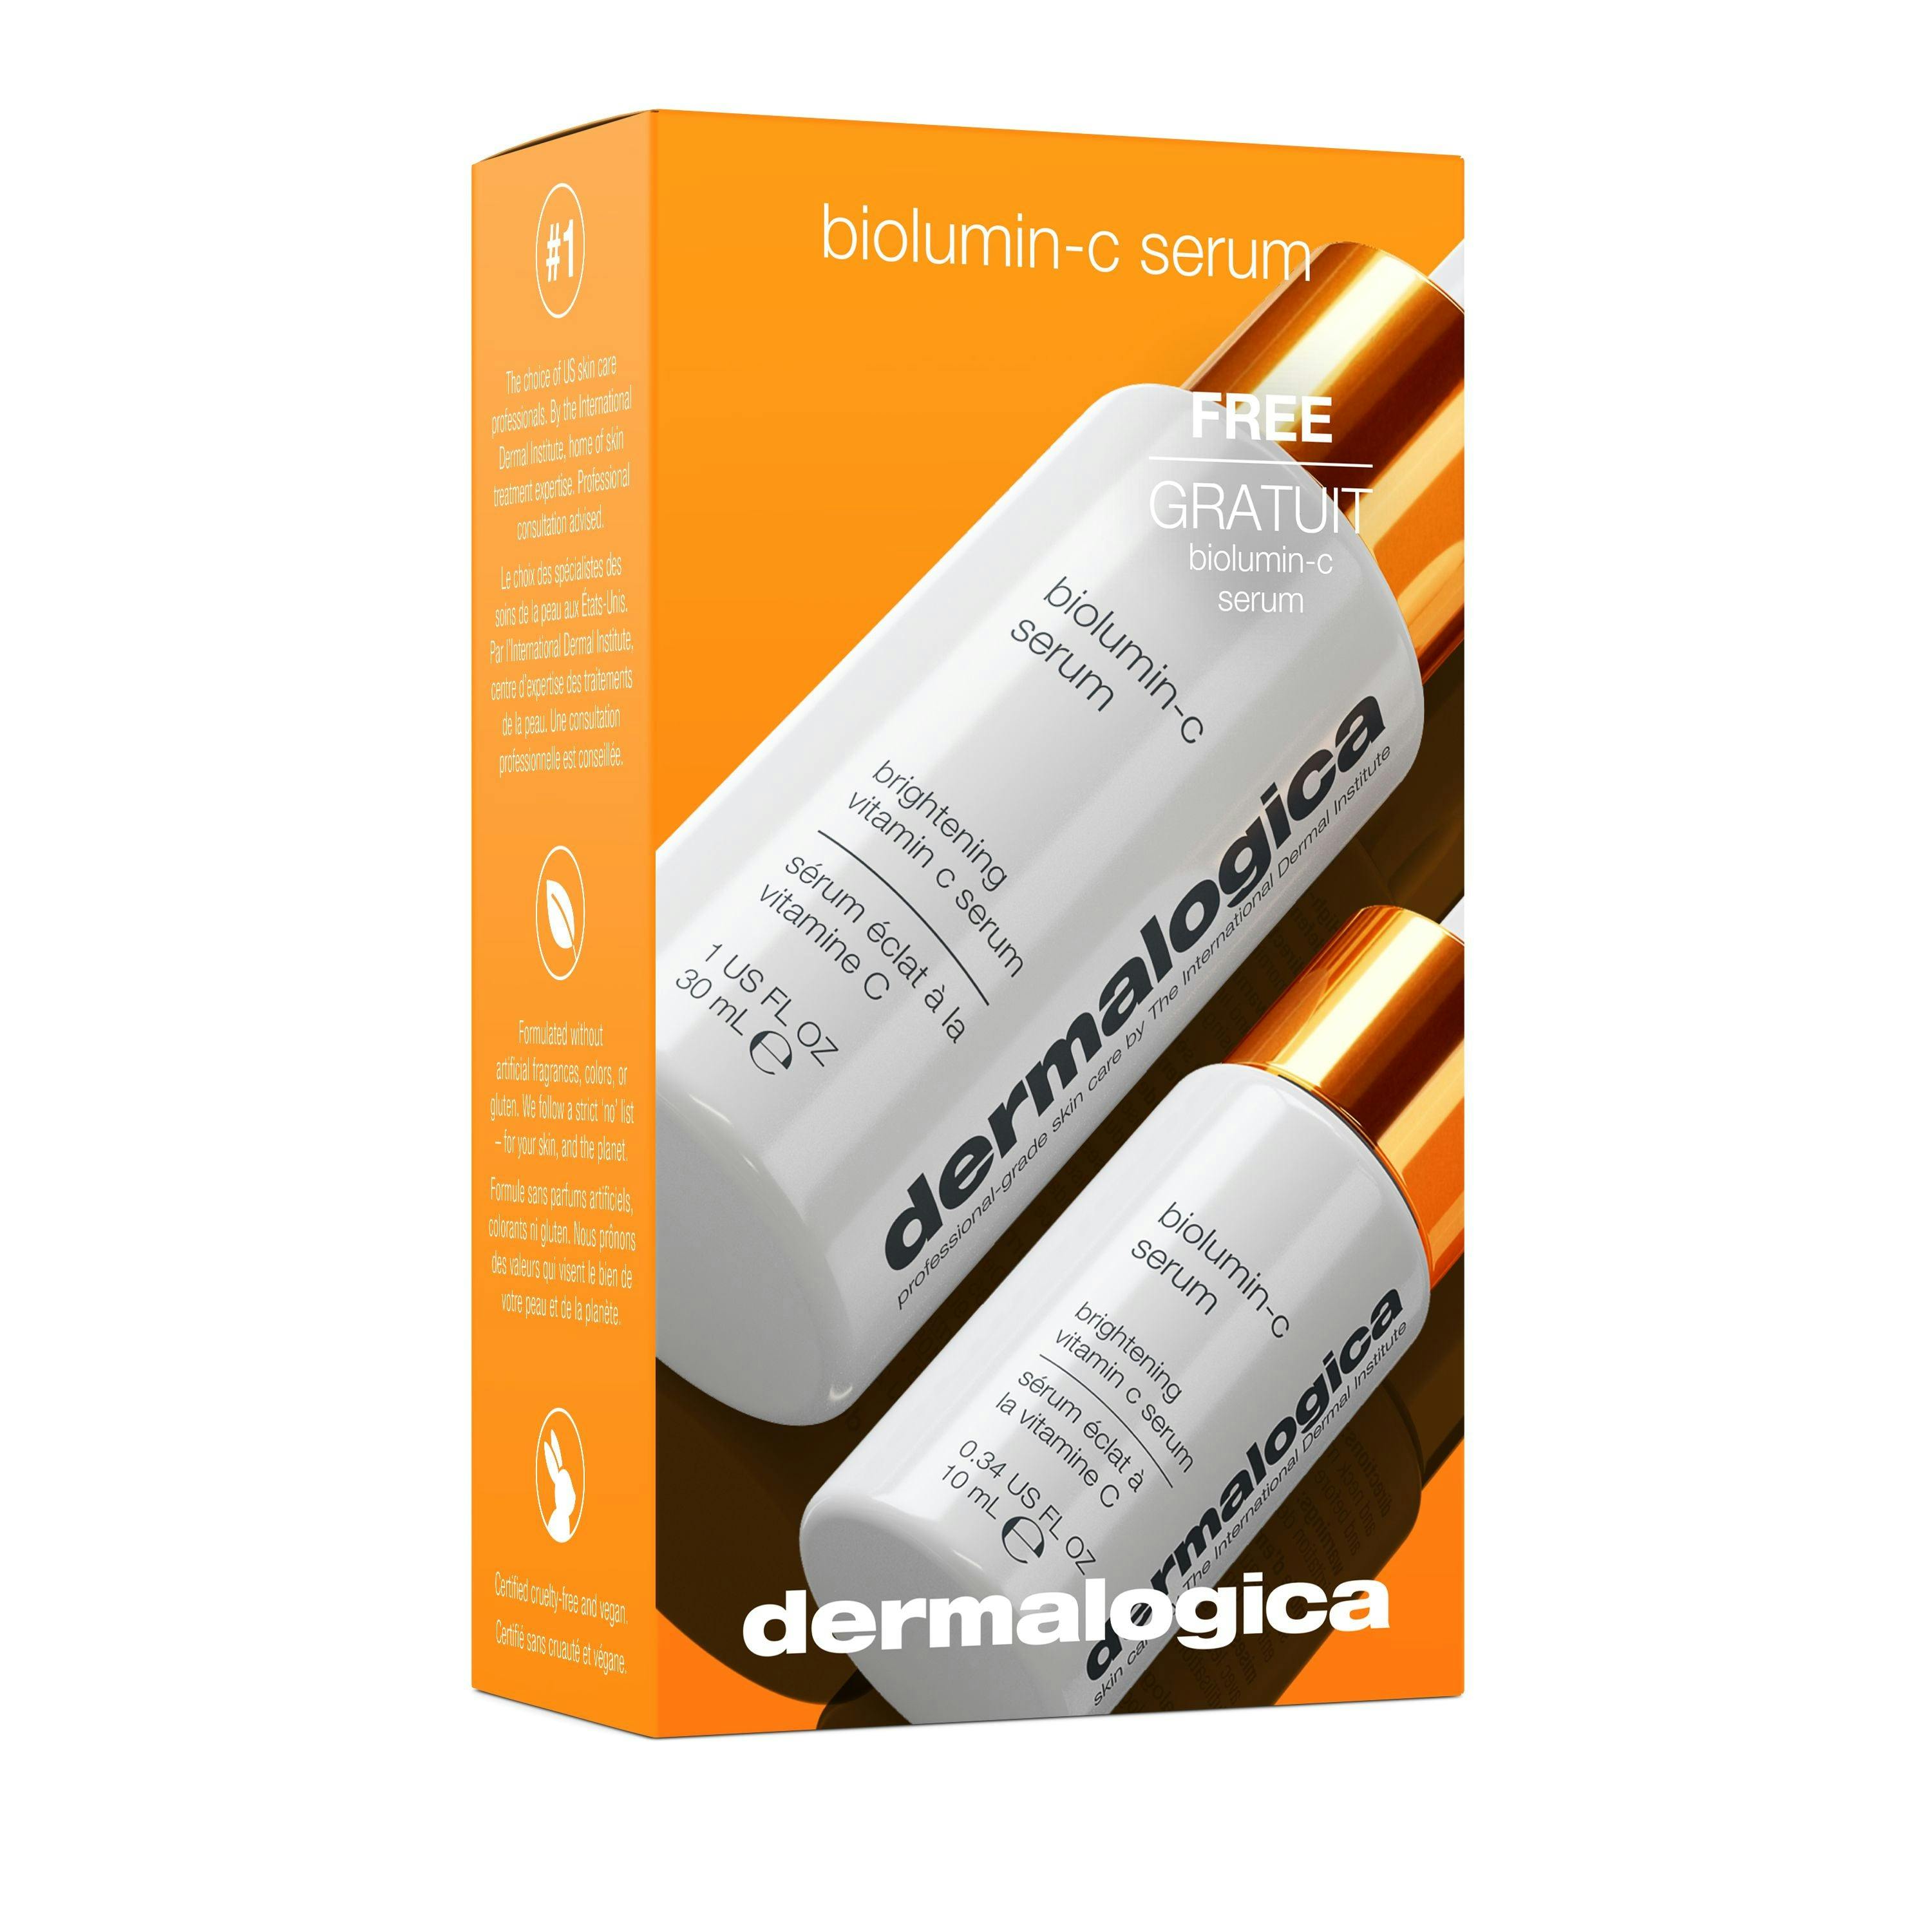 Dermalogica The Ultimate Glow Duo Pack